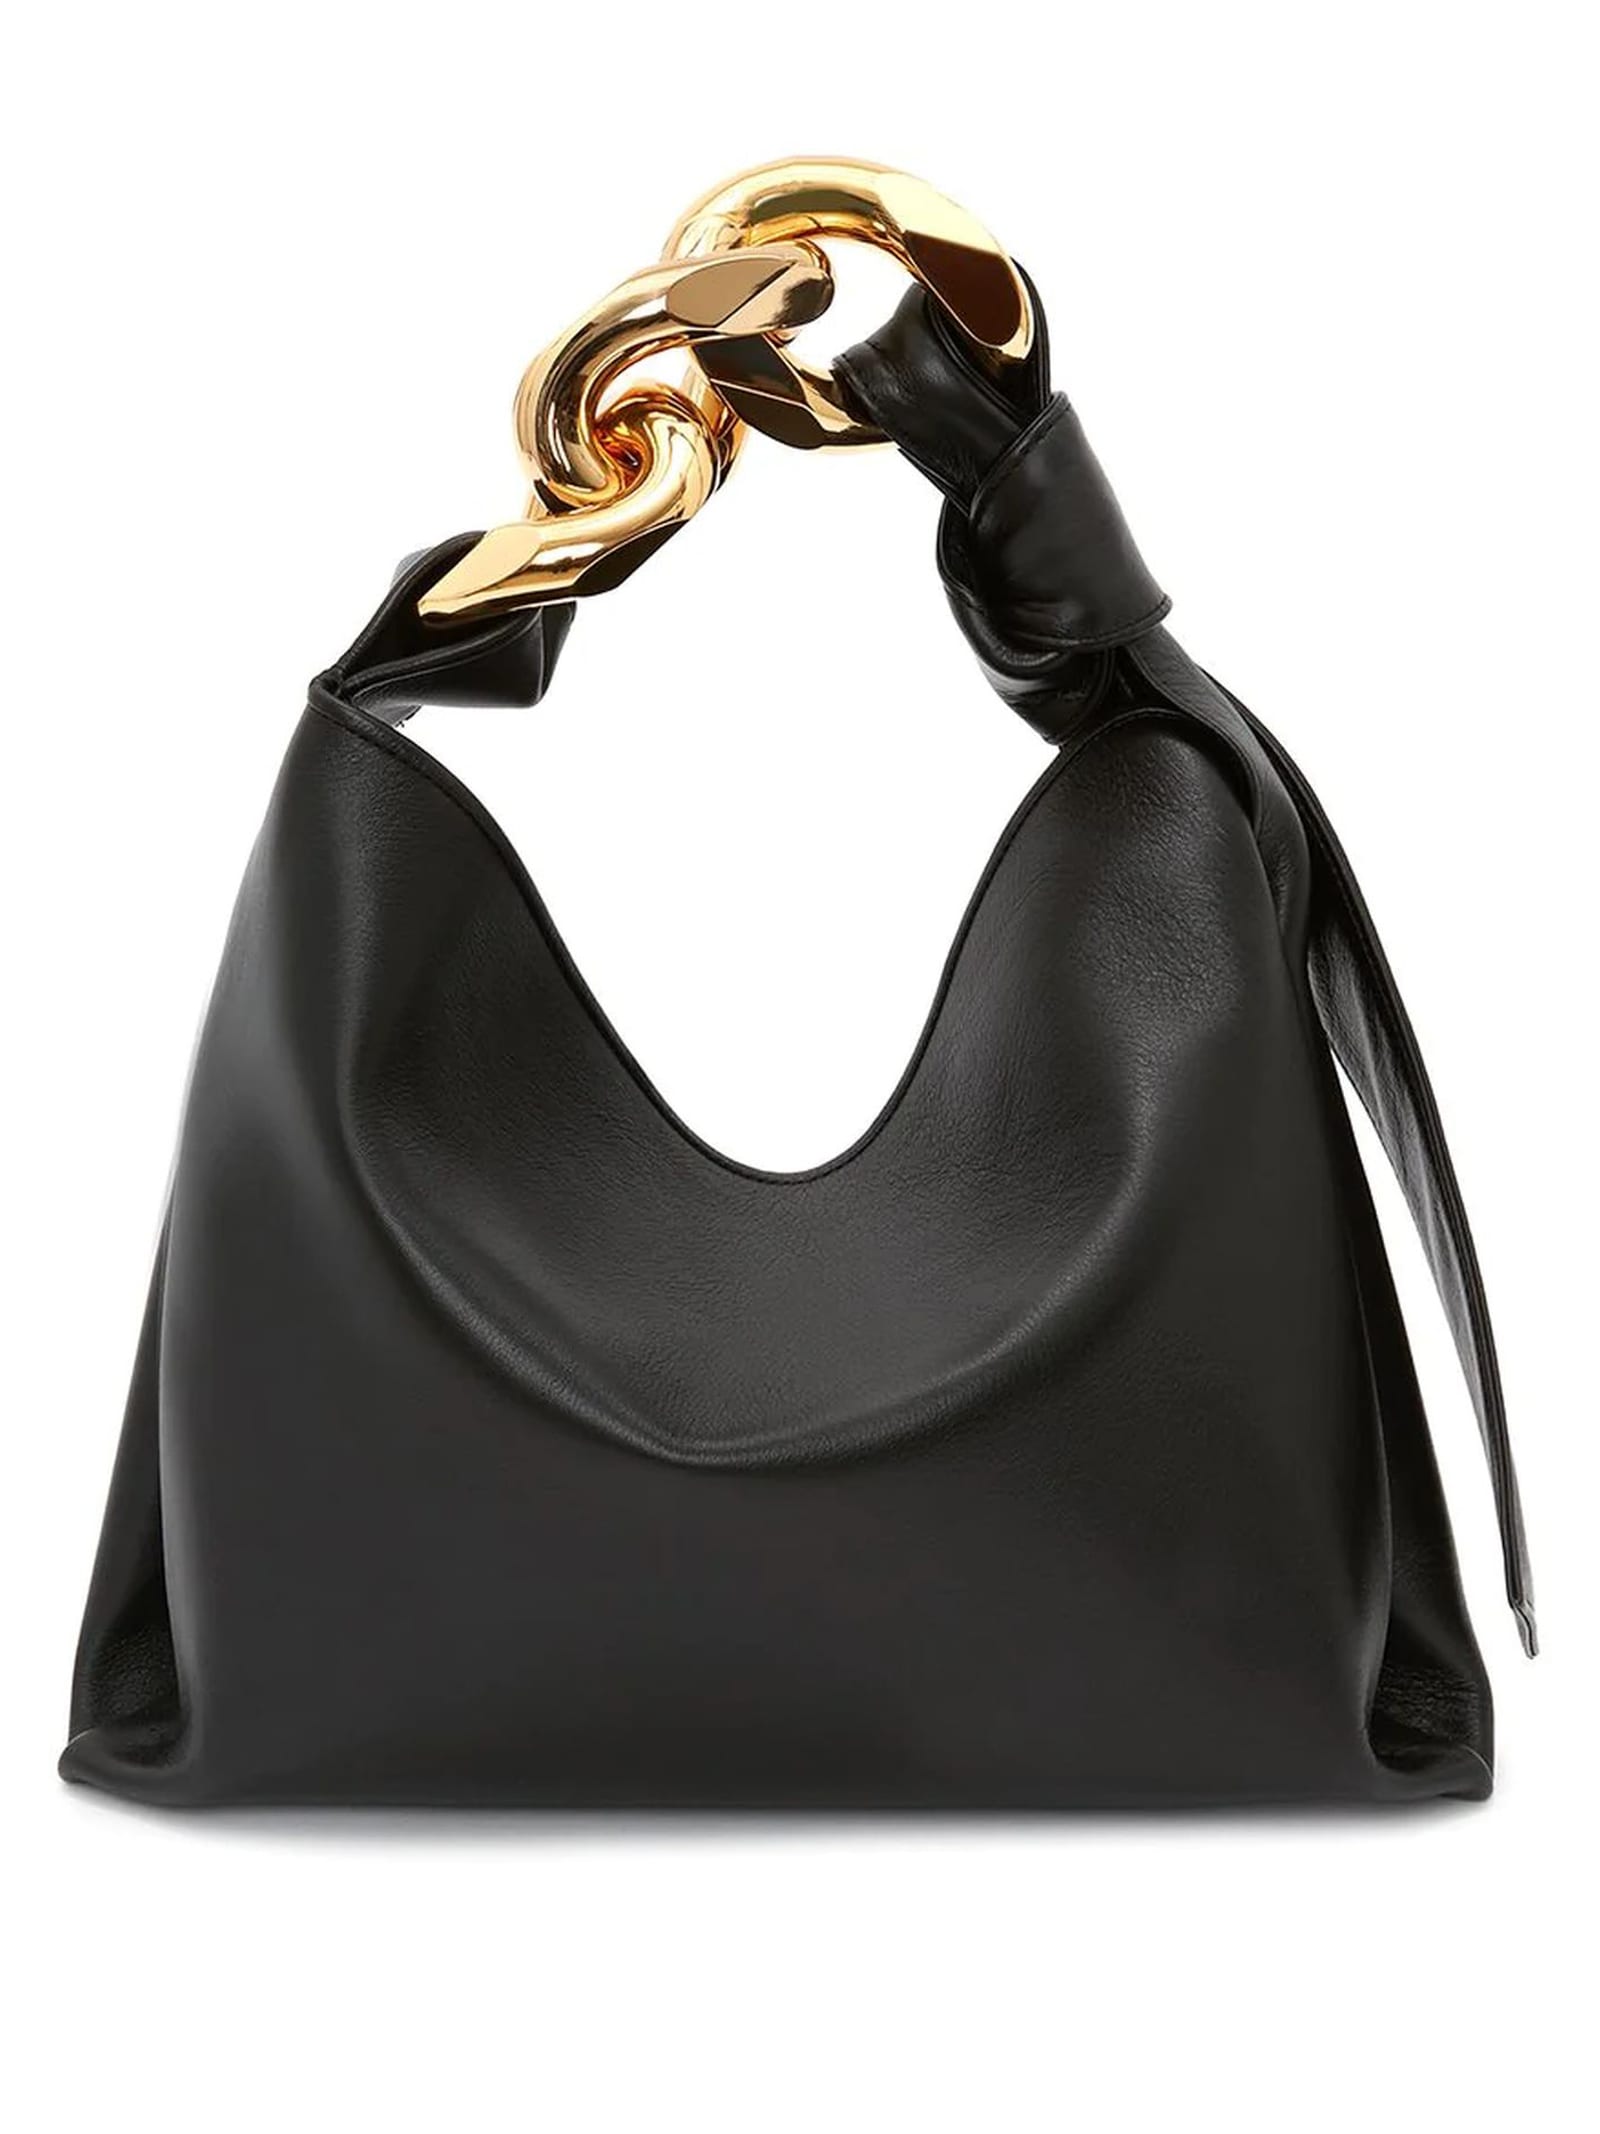 J.W. Anderson Black Leather Small Chain Hobo